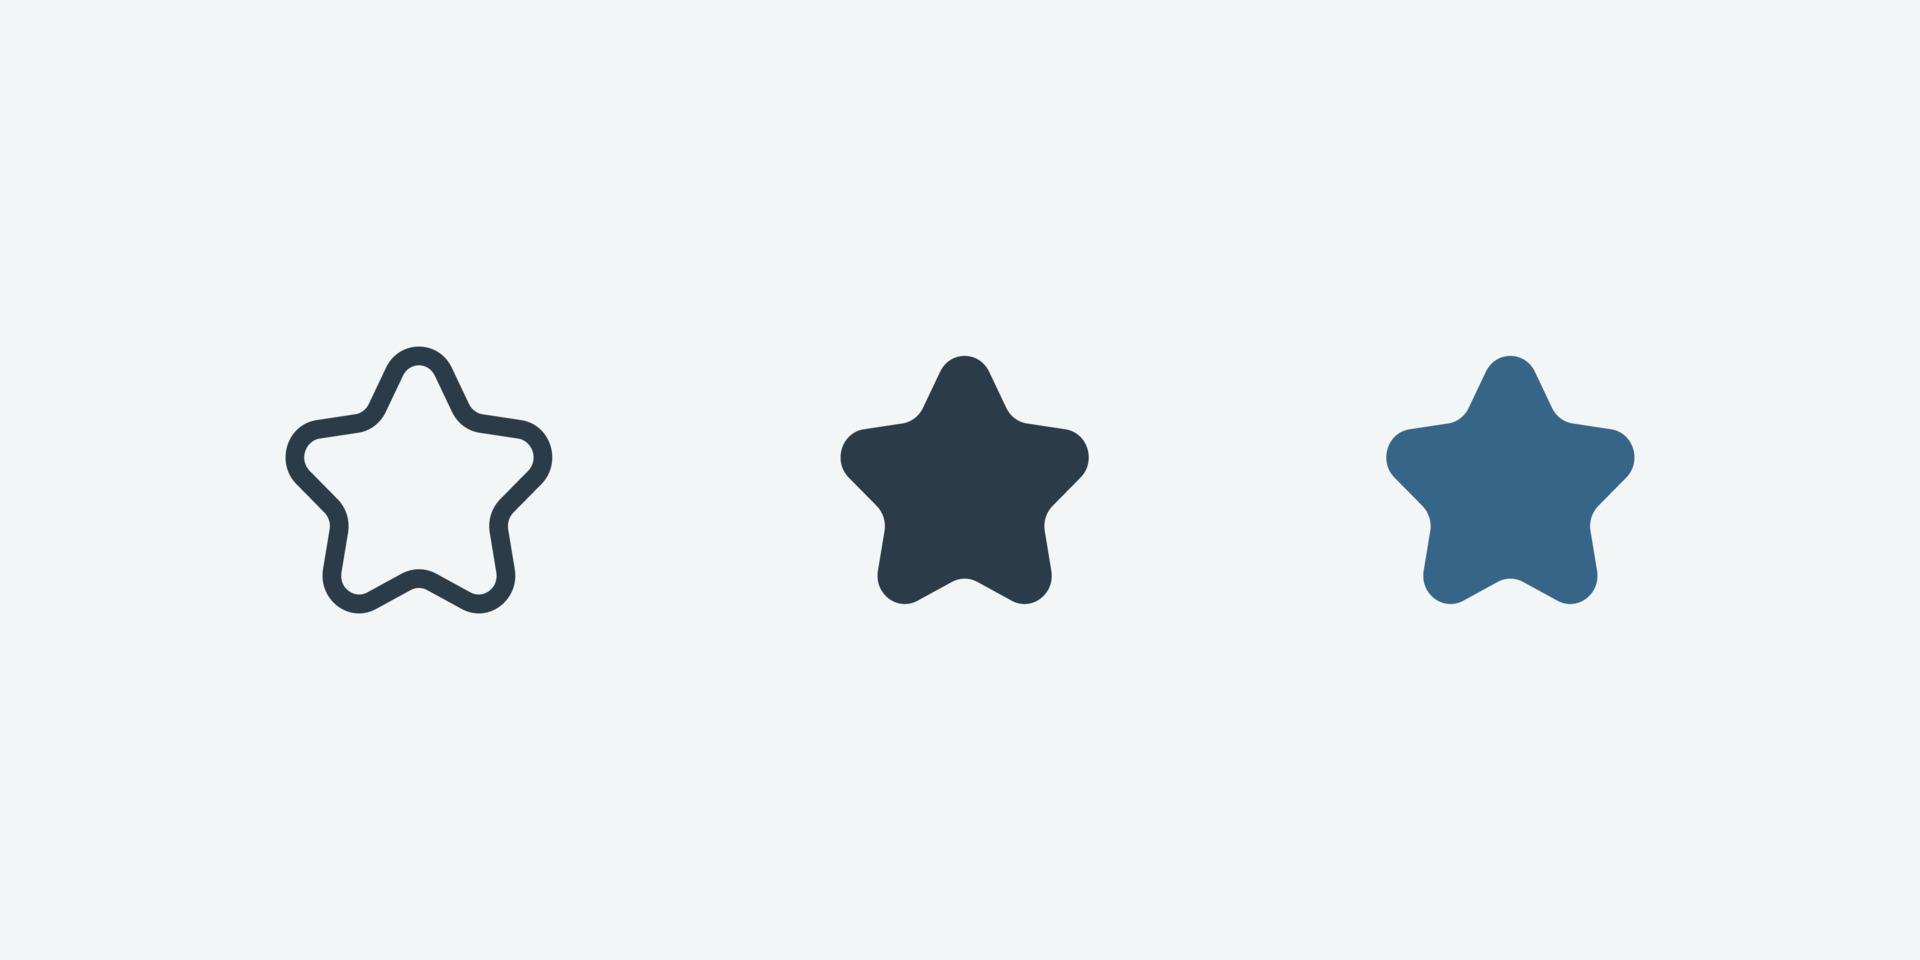 Favorite vector icon isolated for web and app design interfaces